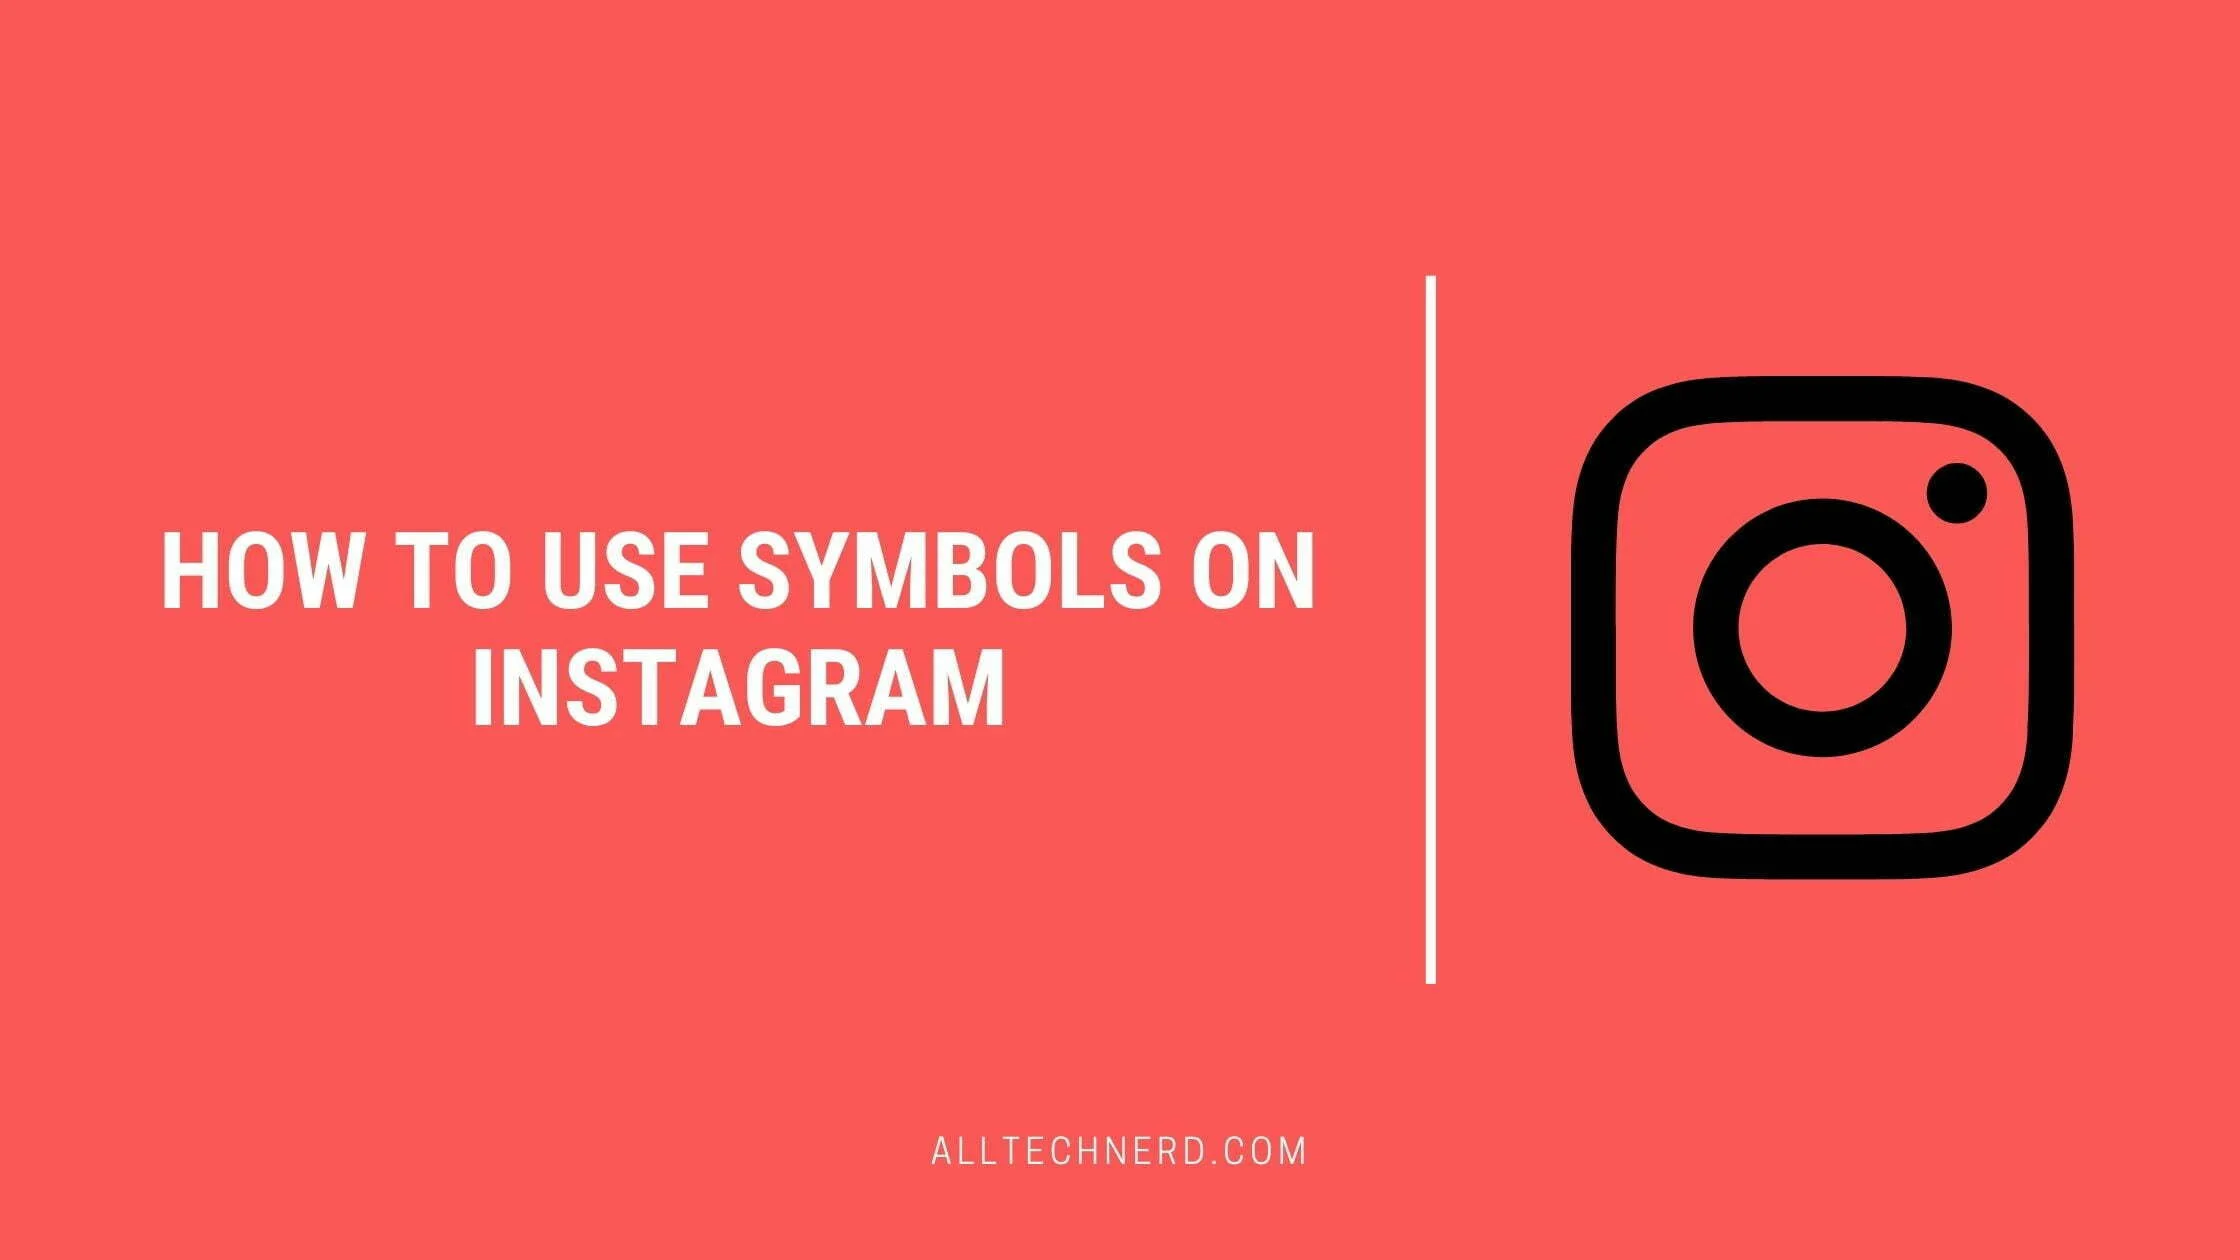 How to Use Symbols on Instagram